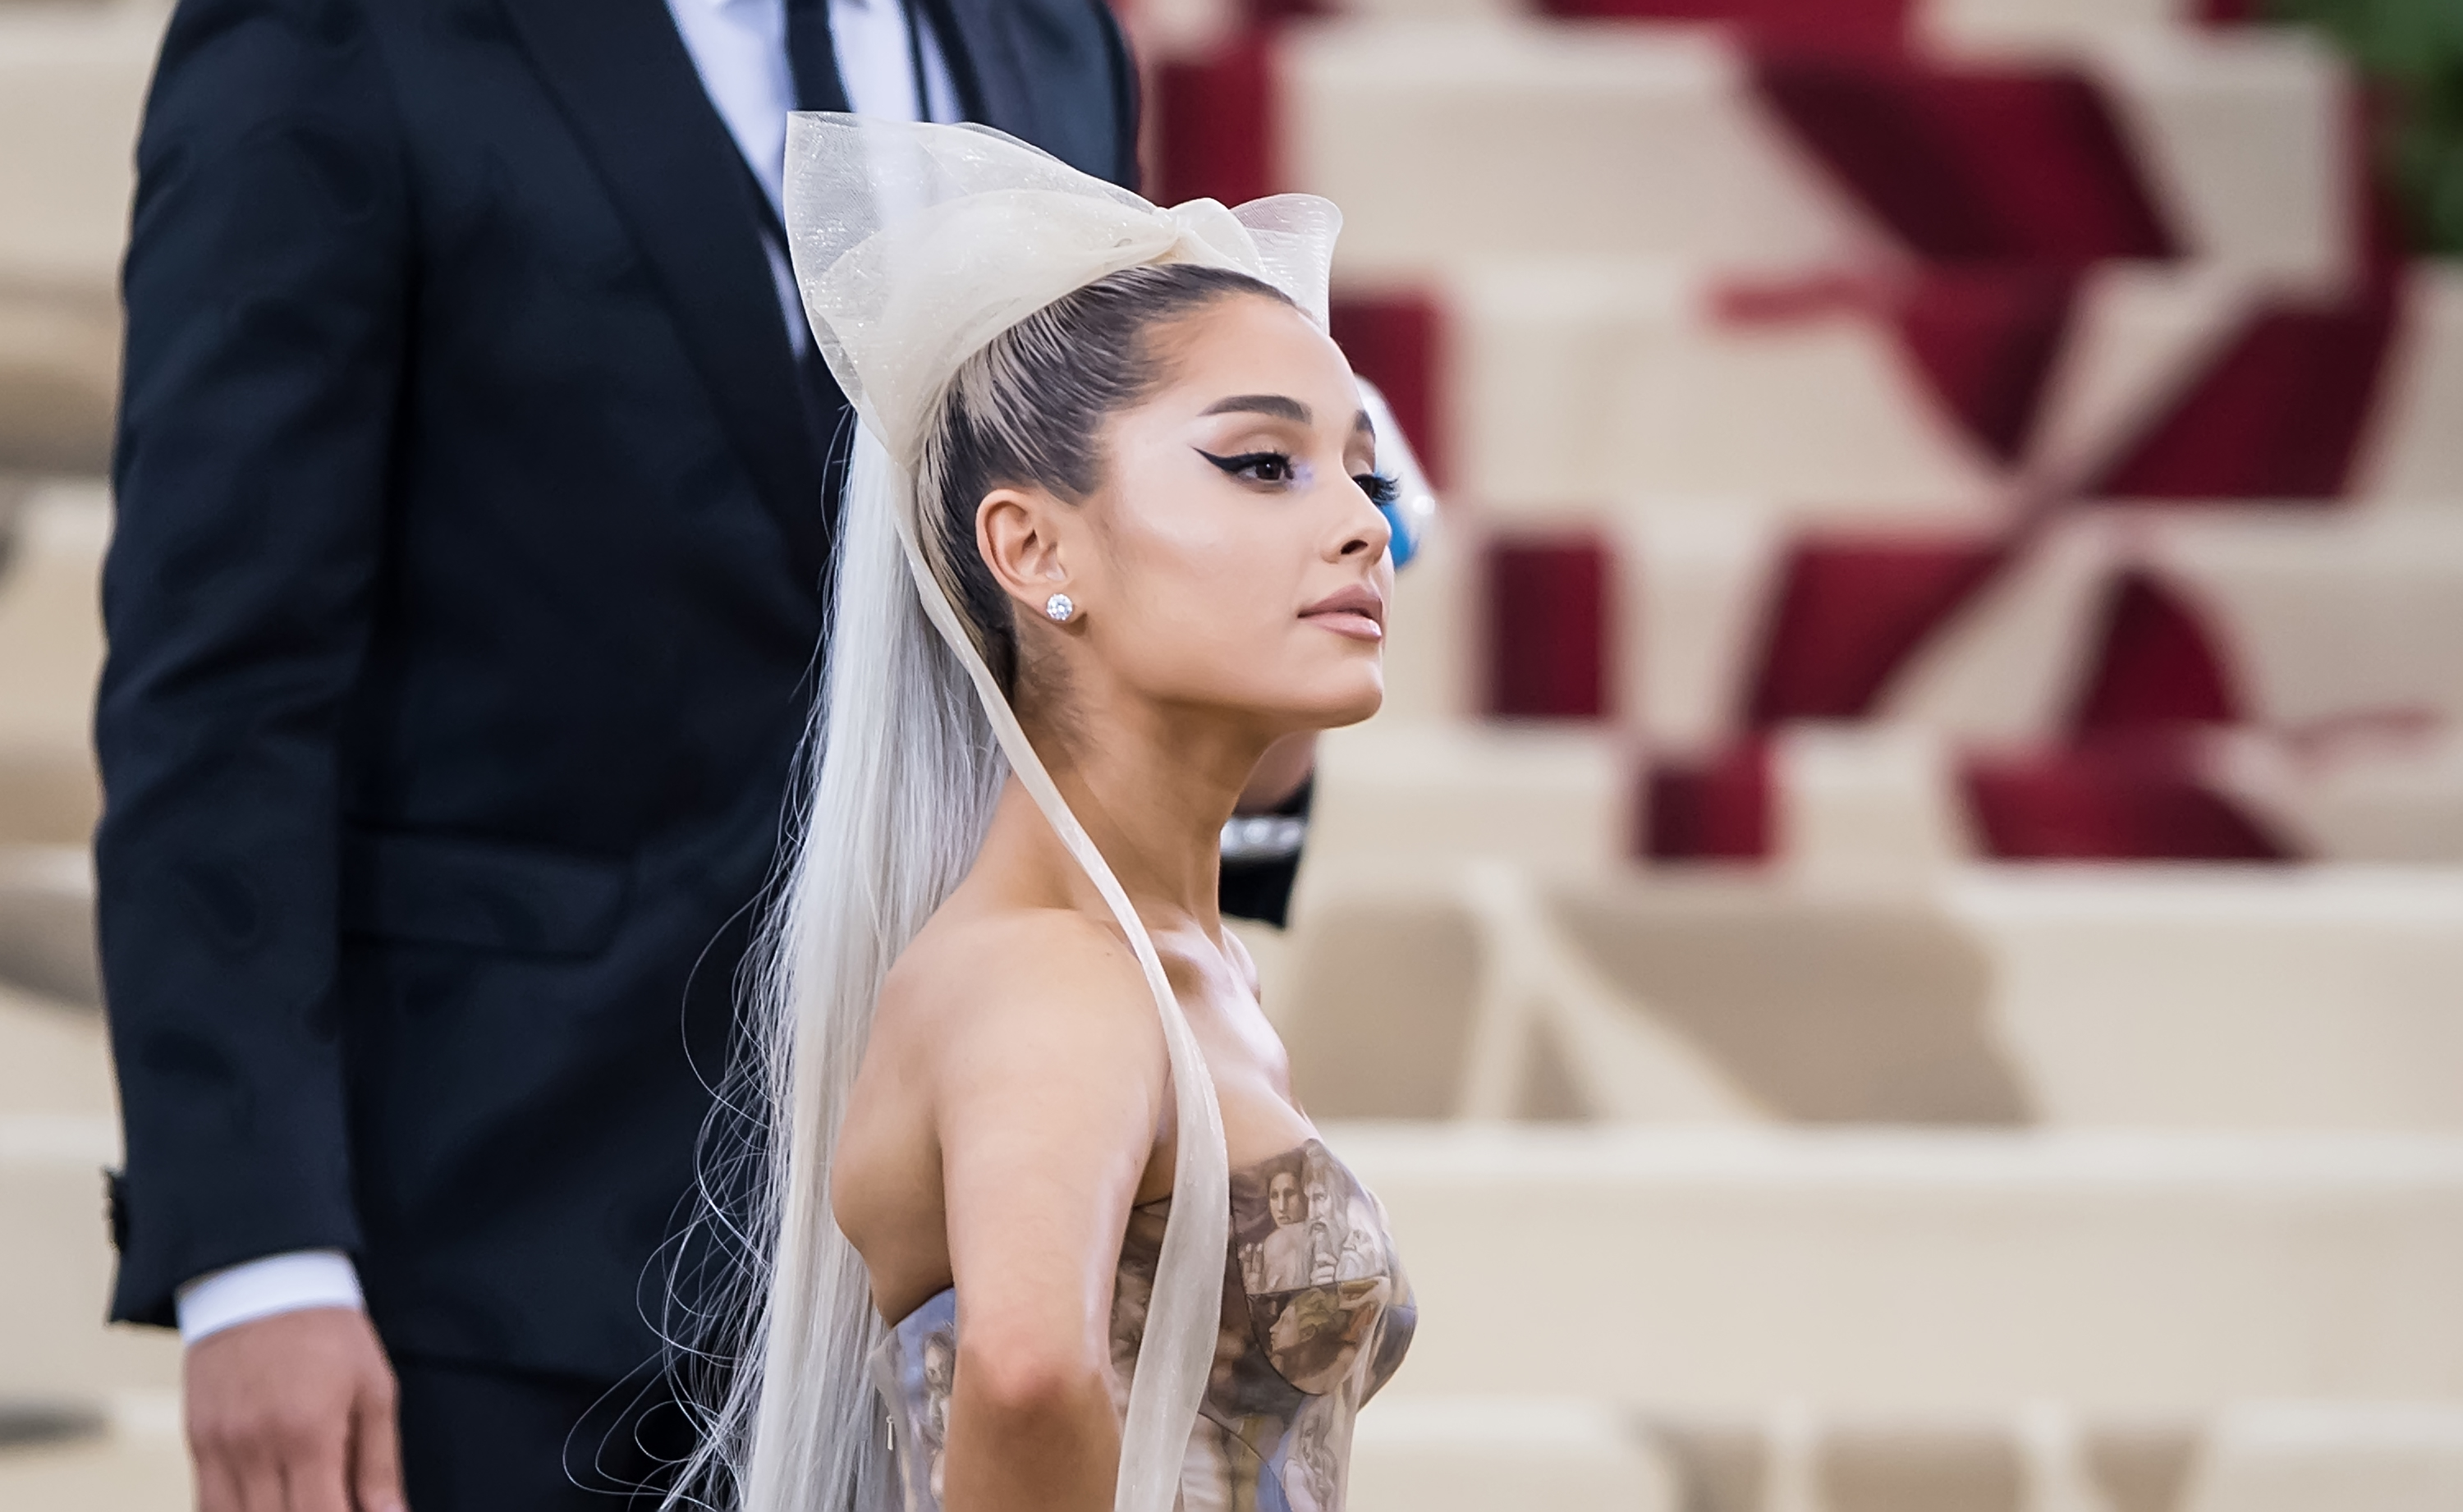 Ariana Grande at an event wearing a bow headpiece and a gown with a fitted bodice and billowing skirt